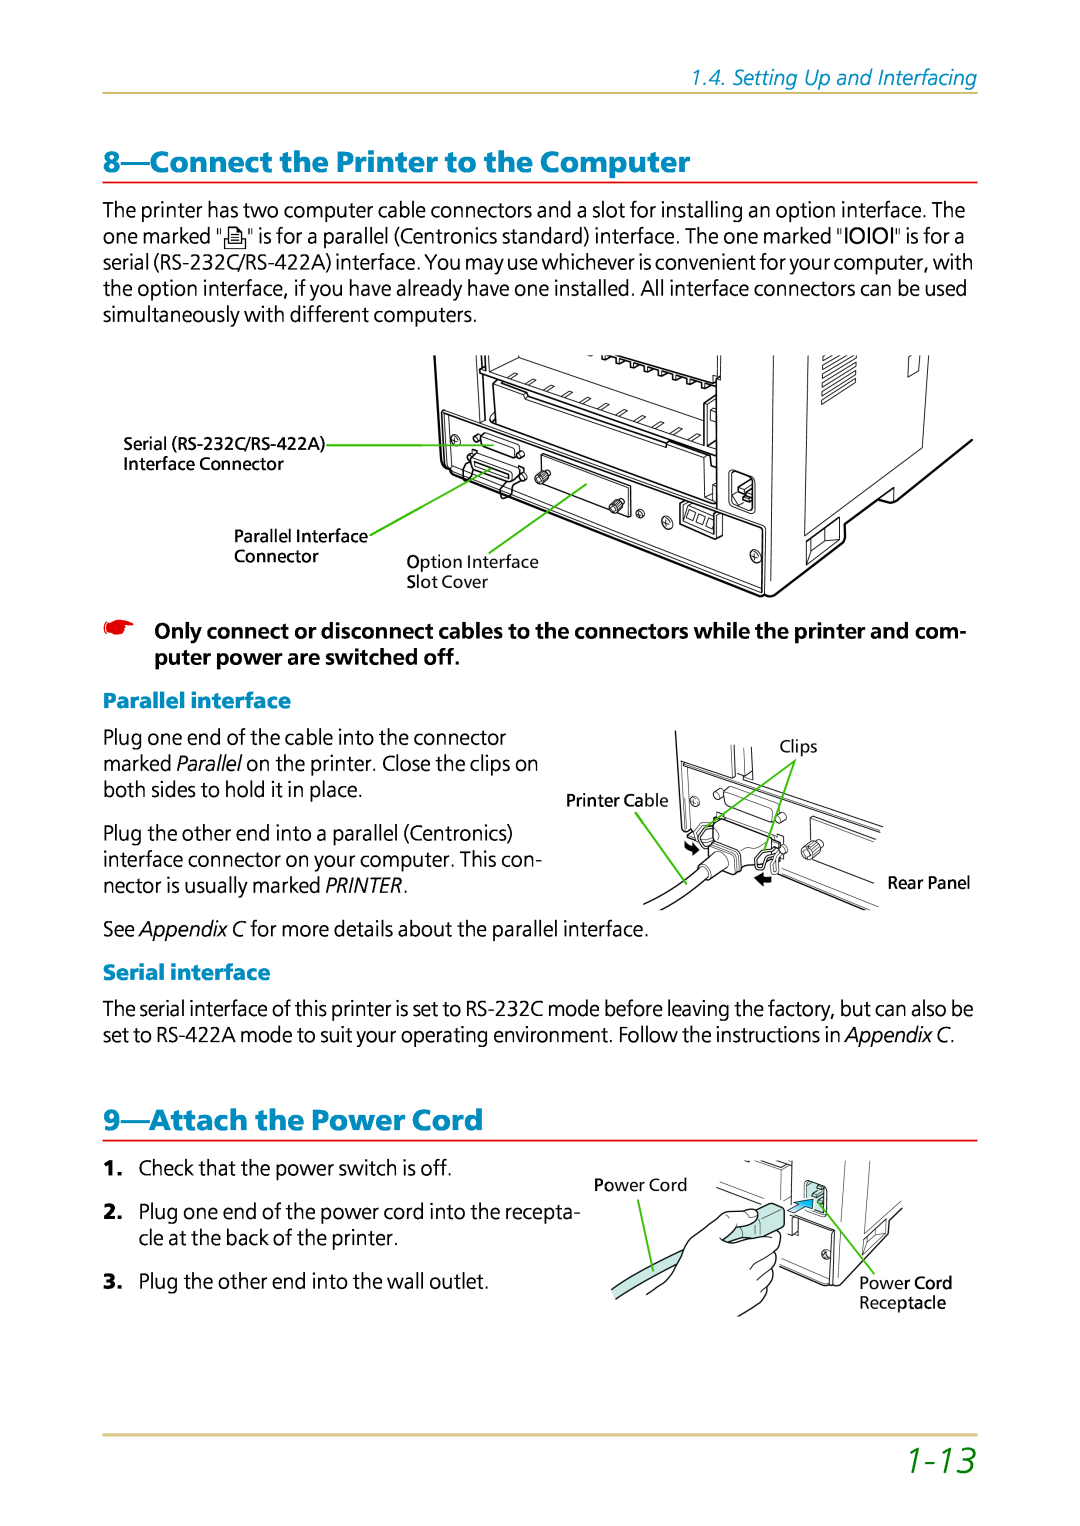 Kyocera FS-1700 user manual 1-13, 8—Connectthe Printer to the Computer, 9—Attachthe Power Cord, Setting Up and Interfacing 